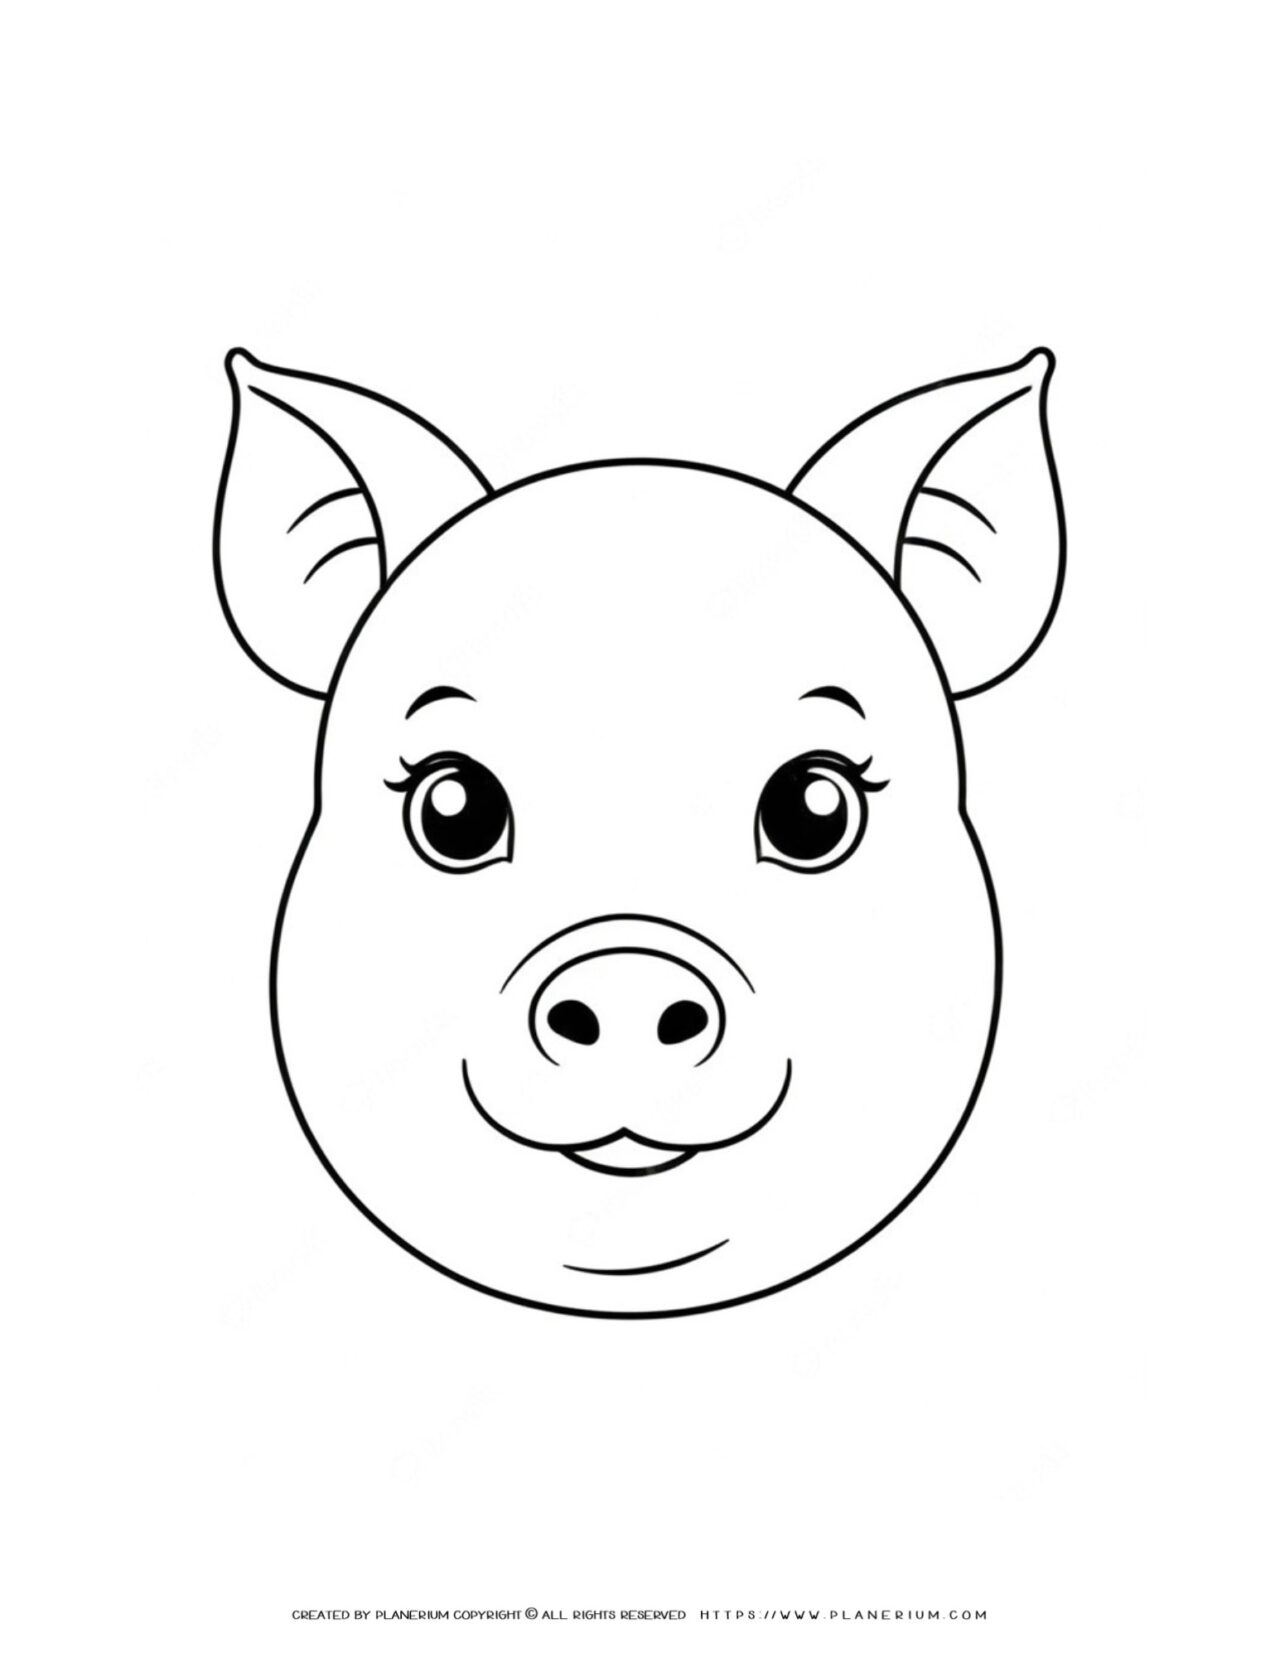 pig-face-outline-animal-coloring-page-for-kids